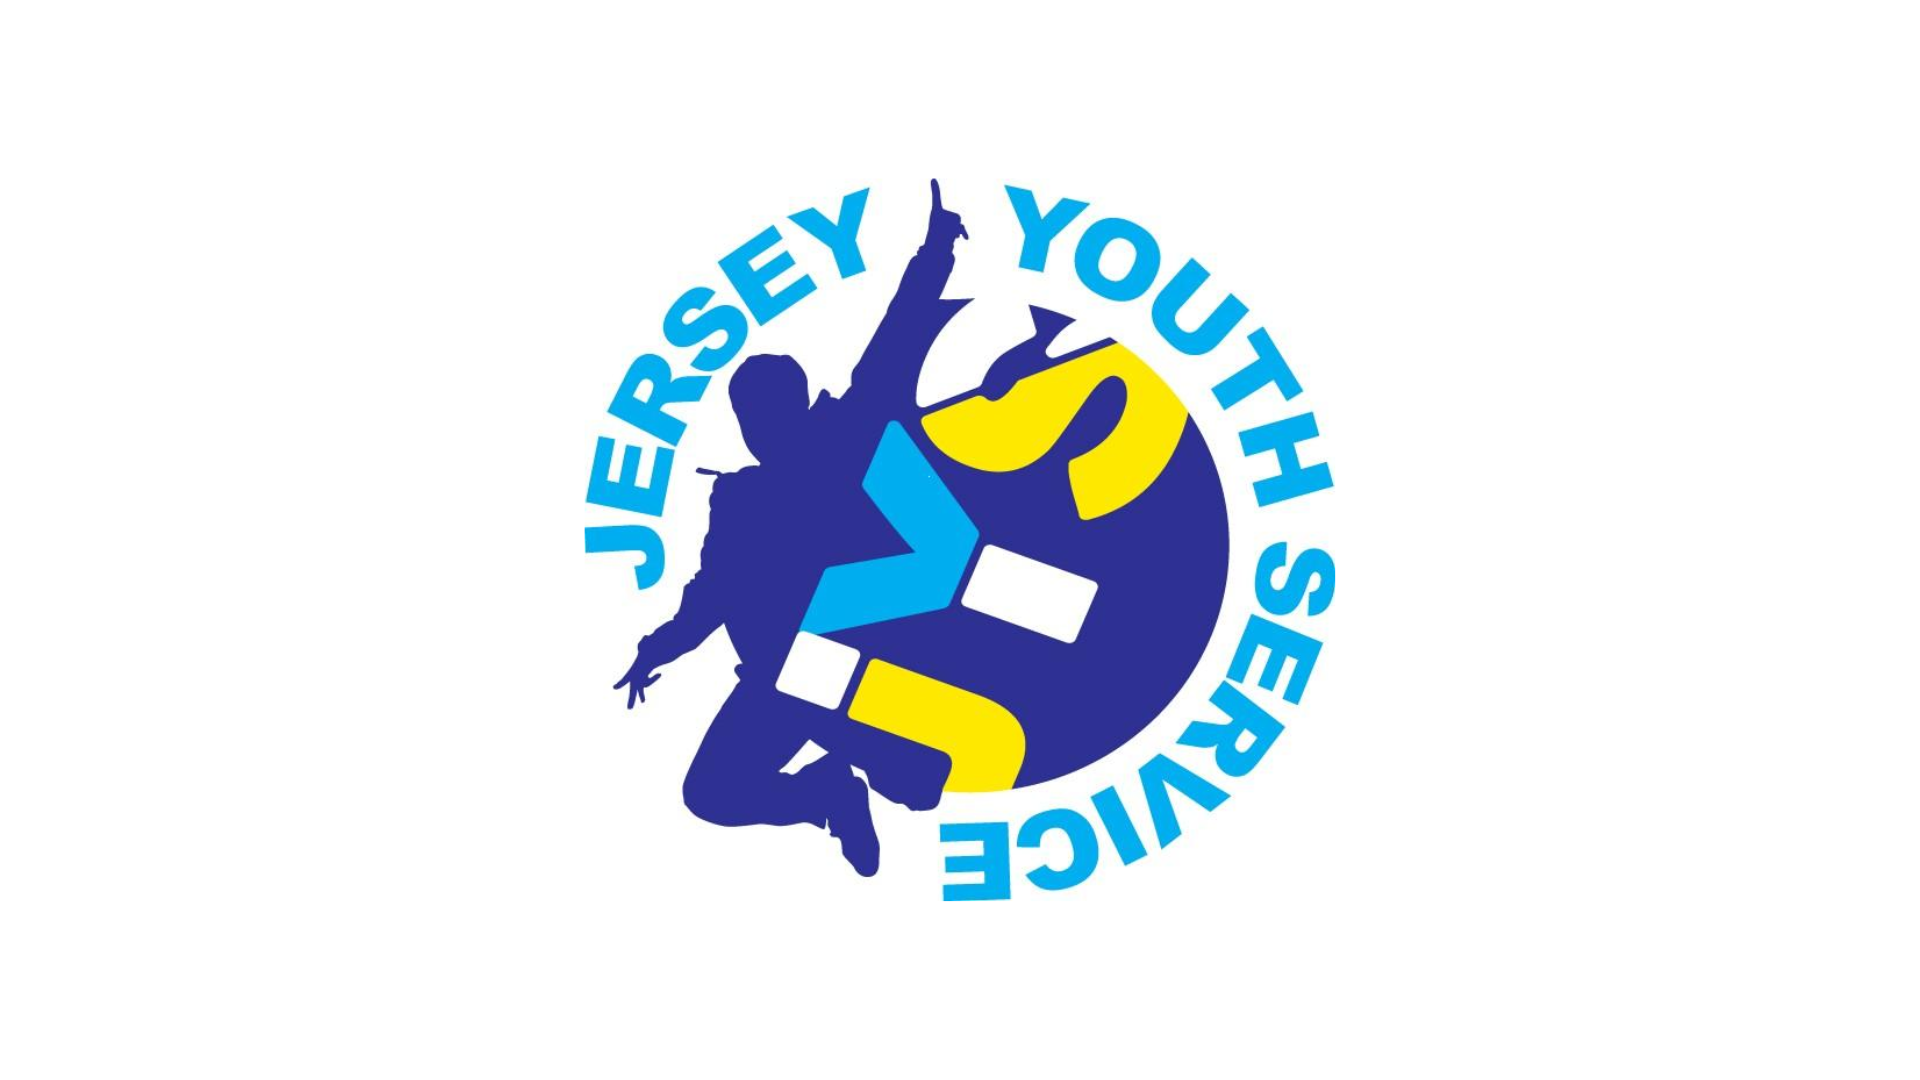 Jersey Youth Service